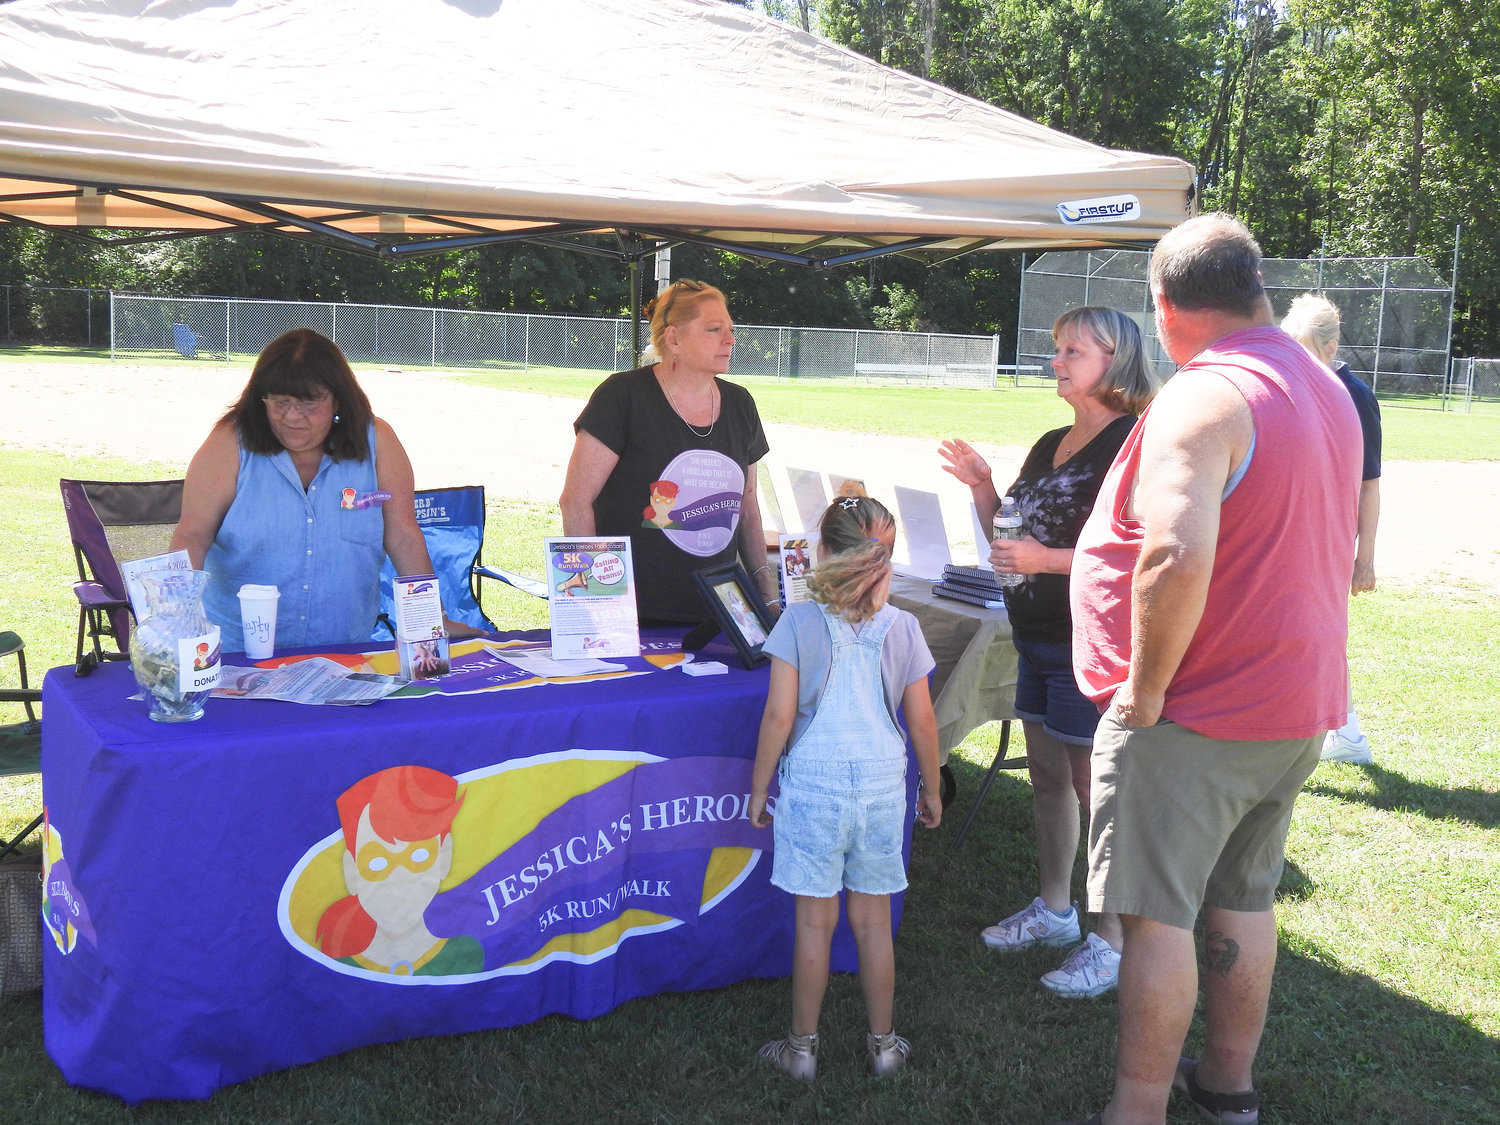 Members of Jessica's Heroes talks with local residents about their organization and how it helps local residents fighting cancer at Wanderers' Rest's 2022 Woofstock fundraiser on Saturday, Aug. 13.